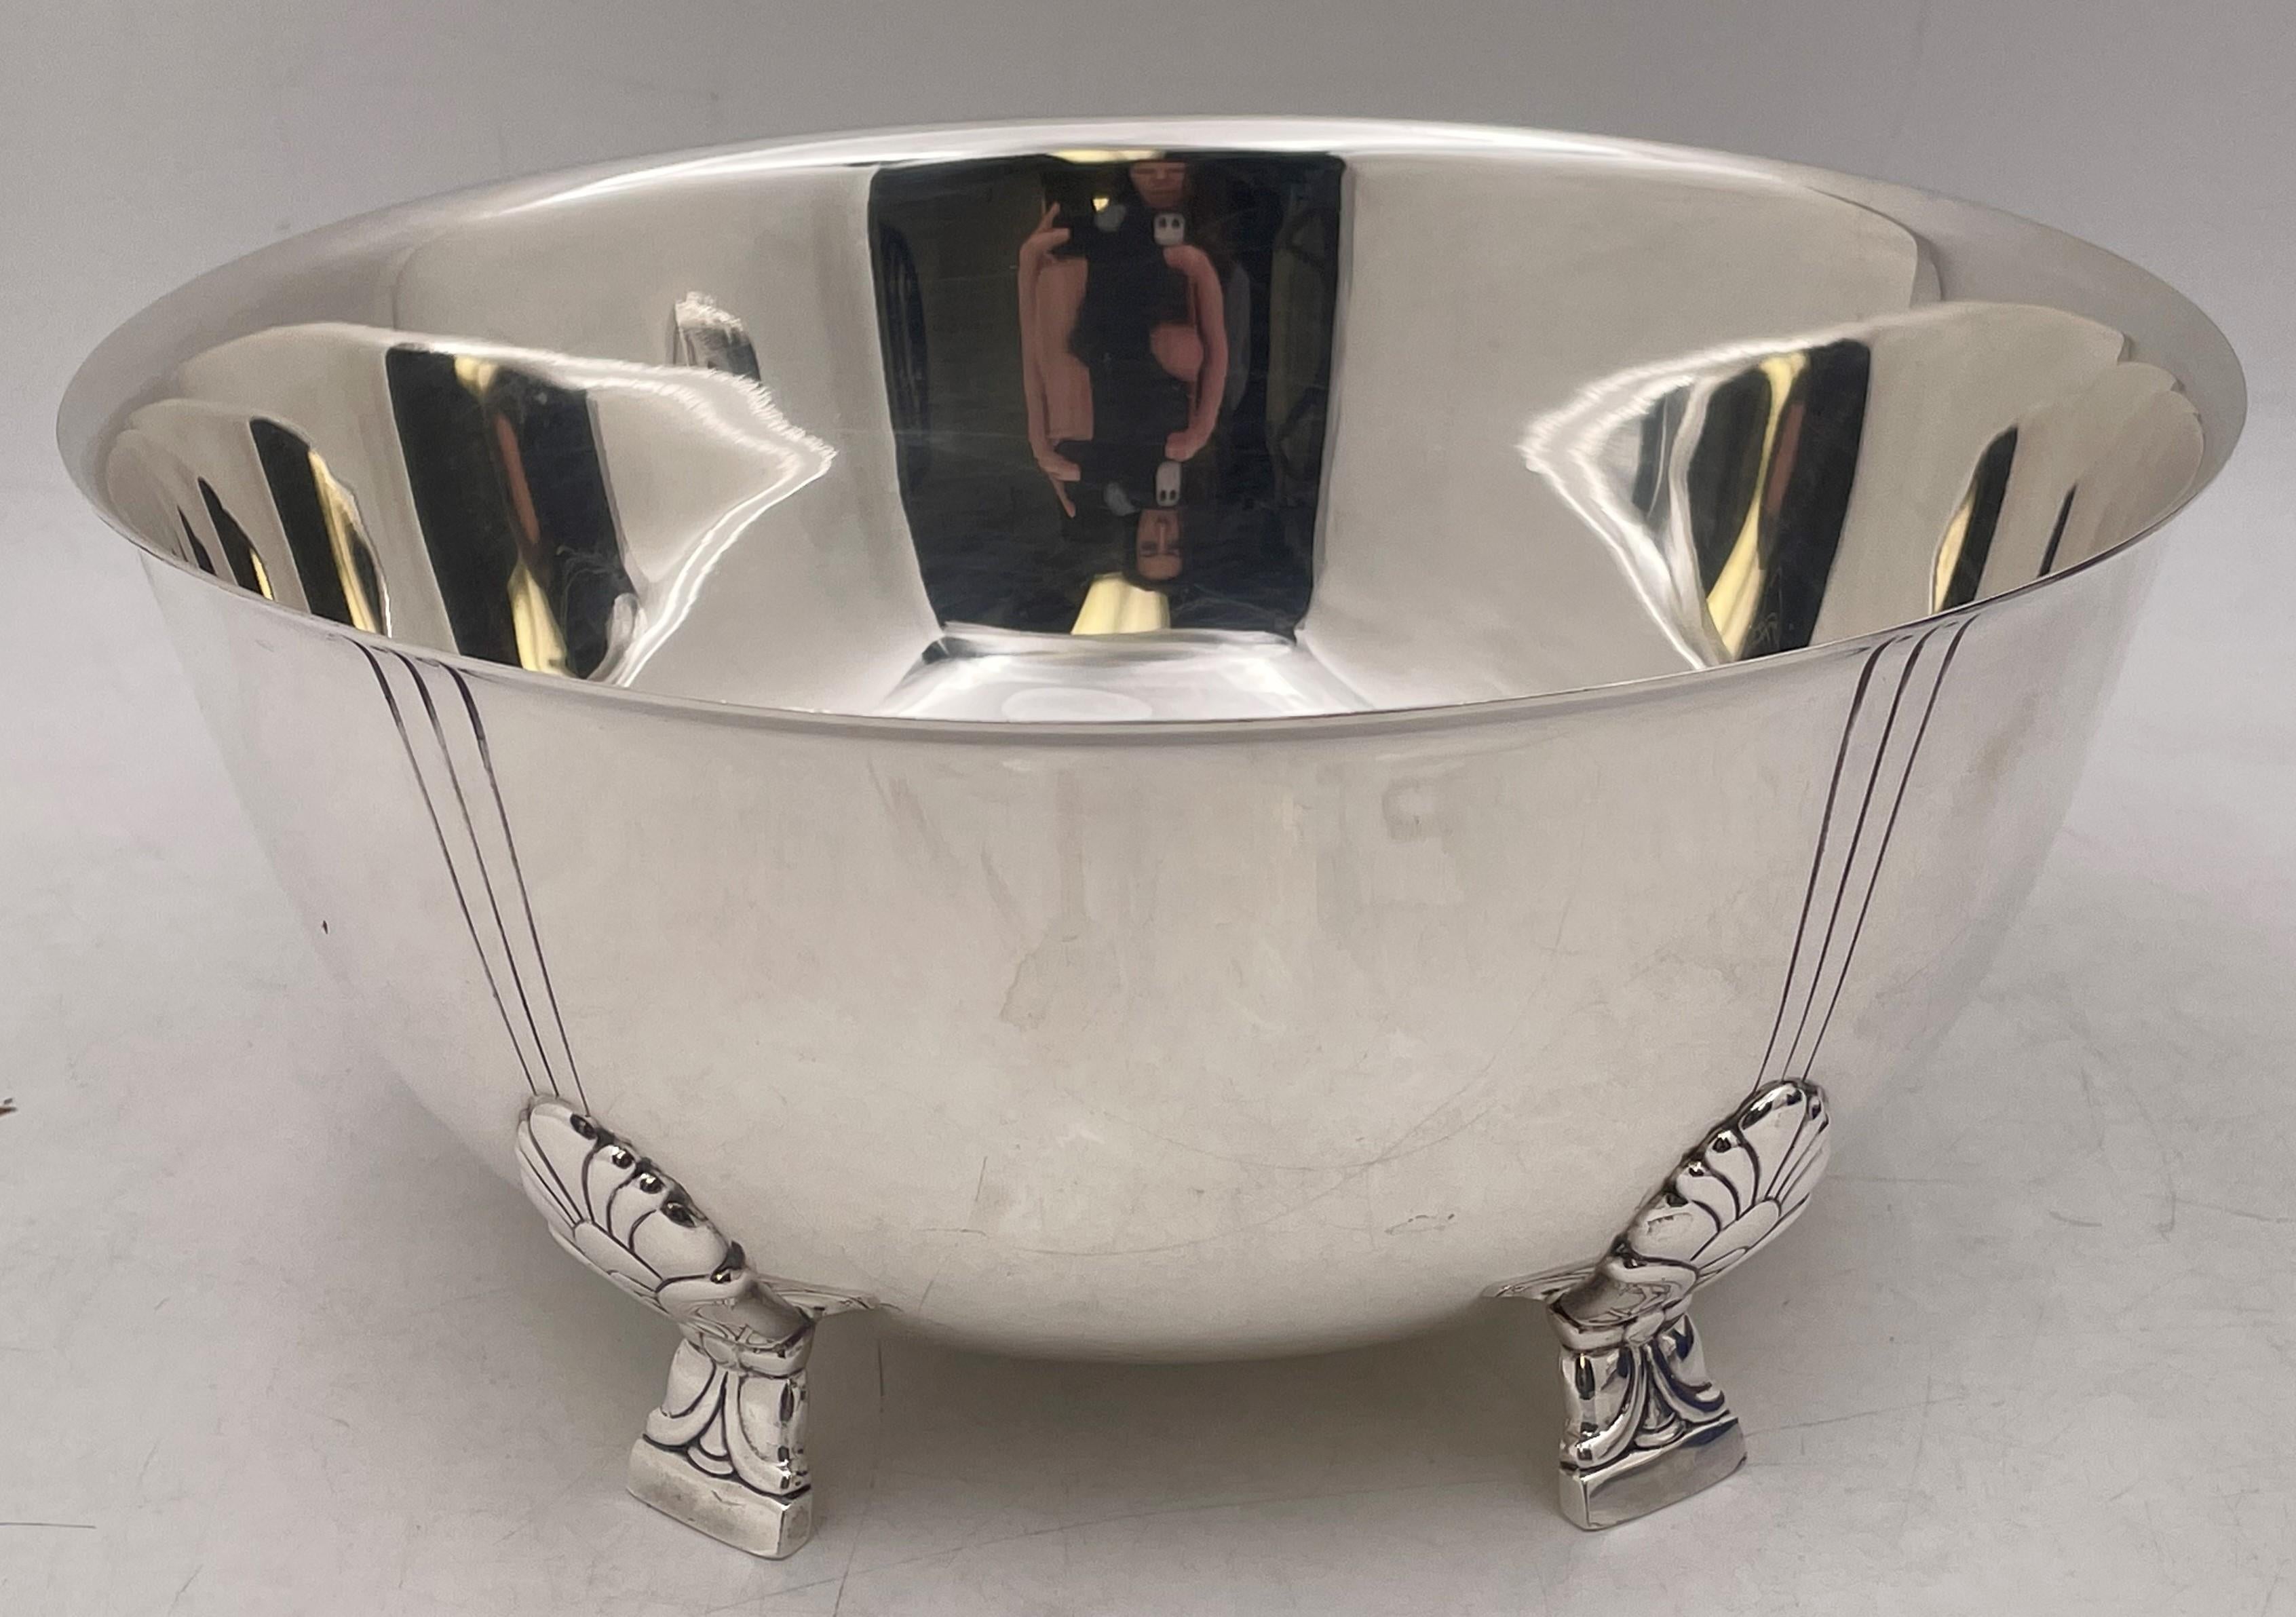 Tiffany & Co., sterling silver bowl, standing on 4 legs showcasing the Palmette pattern, with a beautiful, geometric design in Mid-Century Modern style, in pattern number 23239 from 1947. It measures 10 1/4'' in diameter by 4 3/4'' in height, weighs